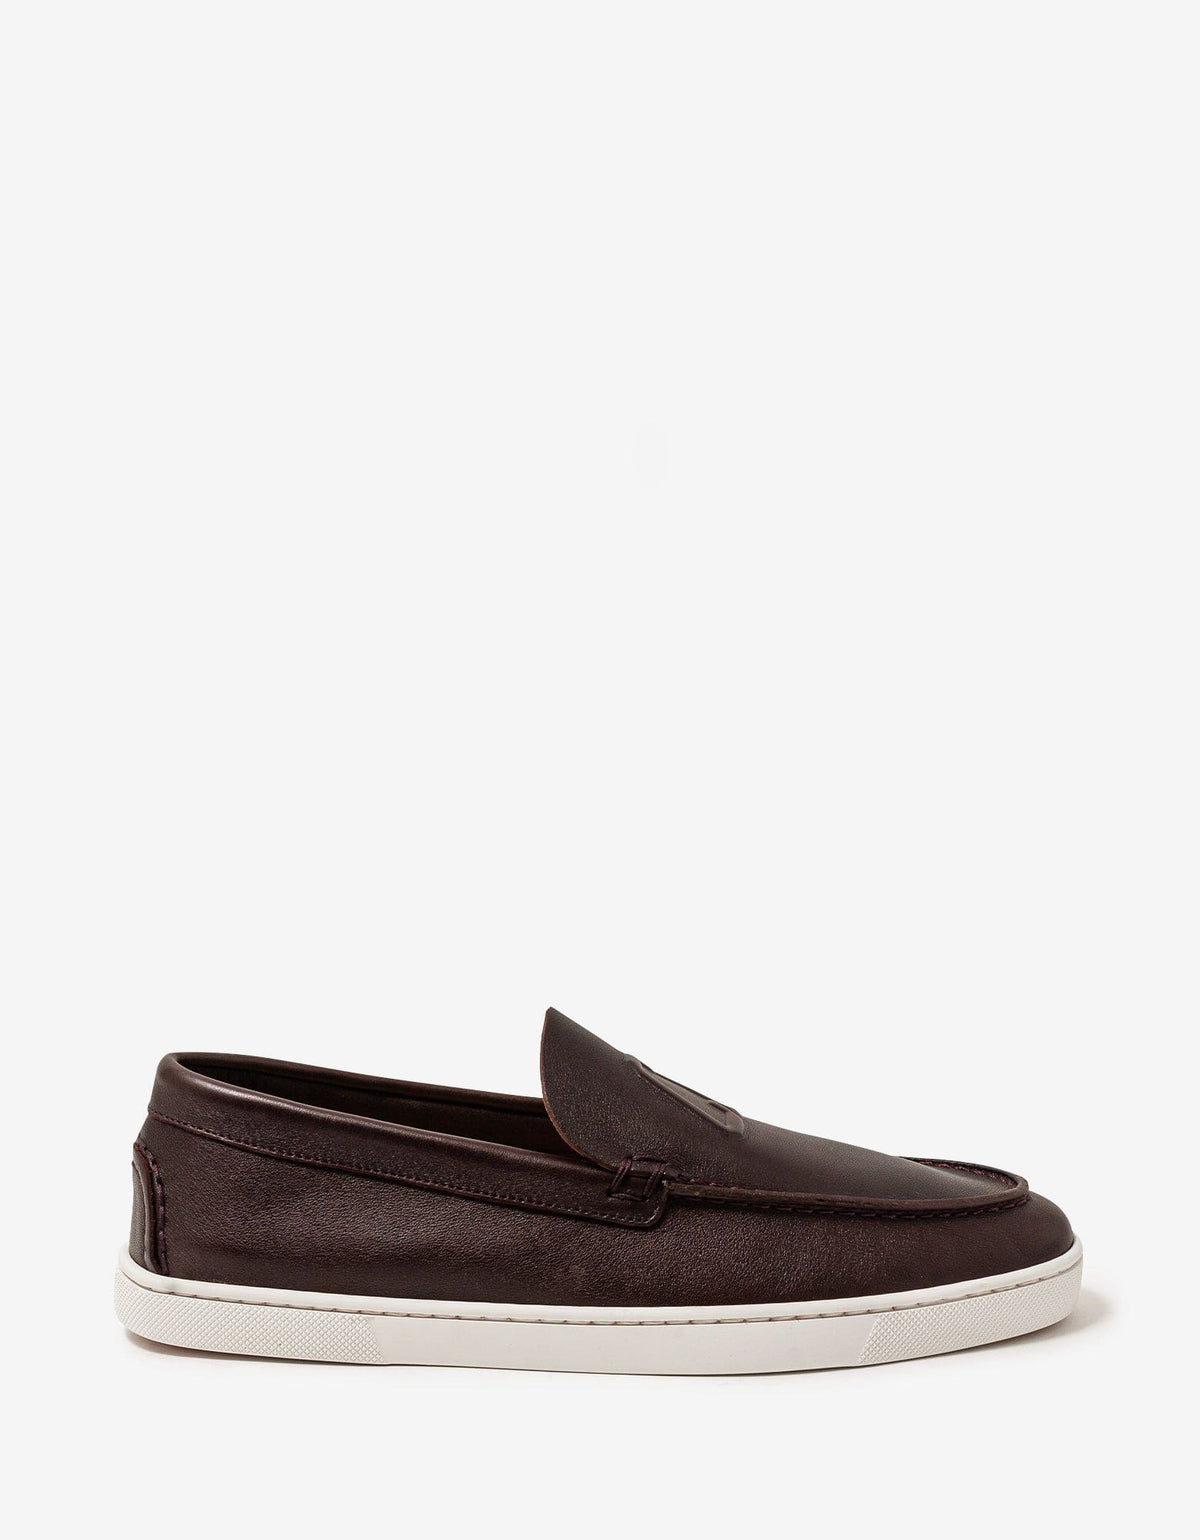 Christian Louboutin Varsiboat Brown Leather Boat Shoes -